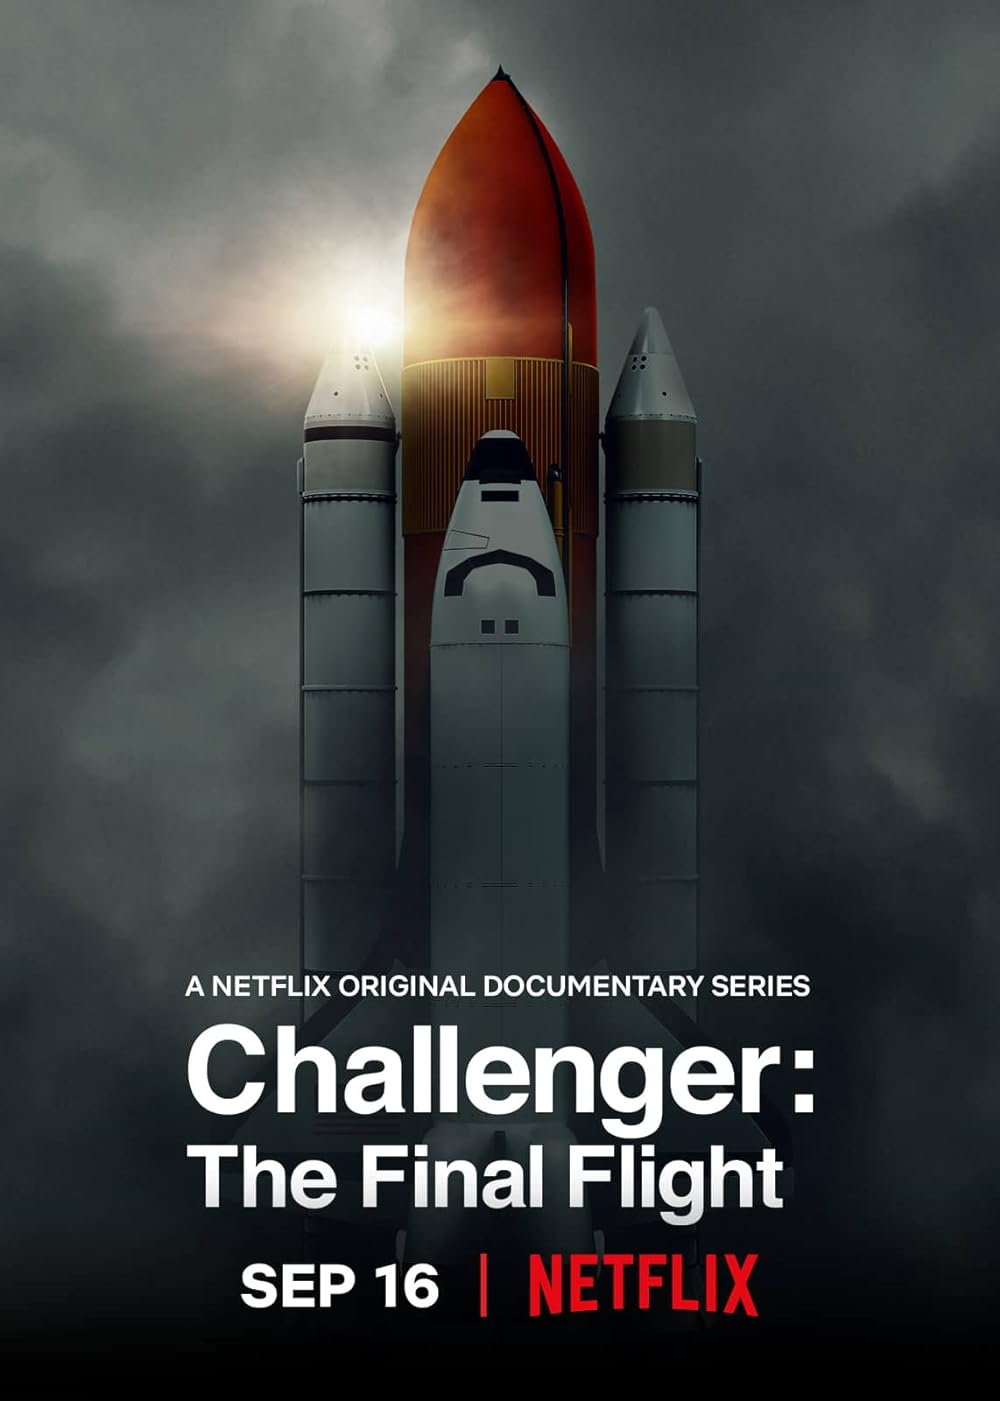 Challenger: The Final Flight (2020) S1 EP1 Space For Everyone 640Kbps 23.976Fps 48Khz 5.1Ch DD+ NF E-AC3 Turkish Audio TAC